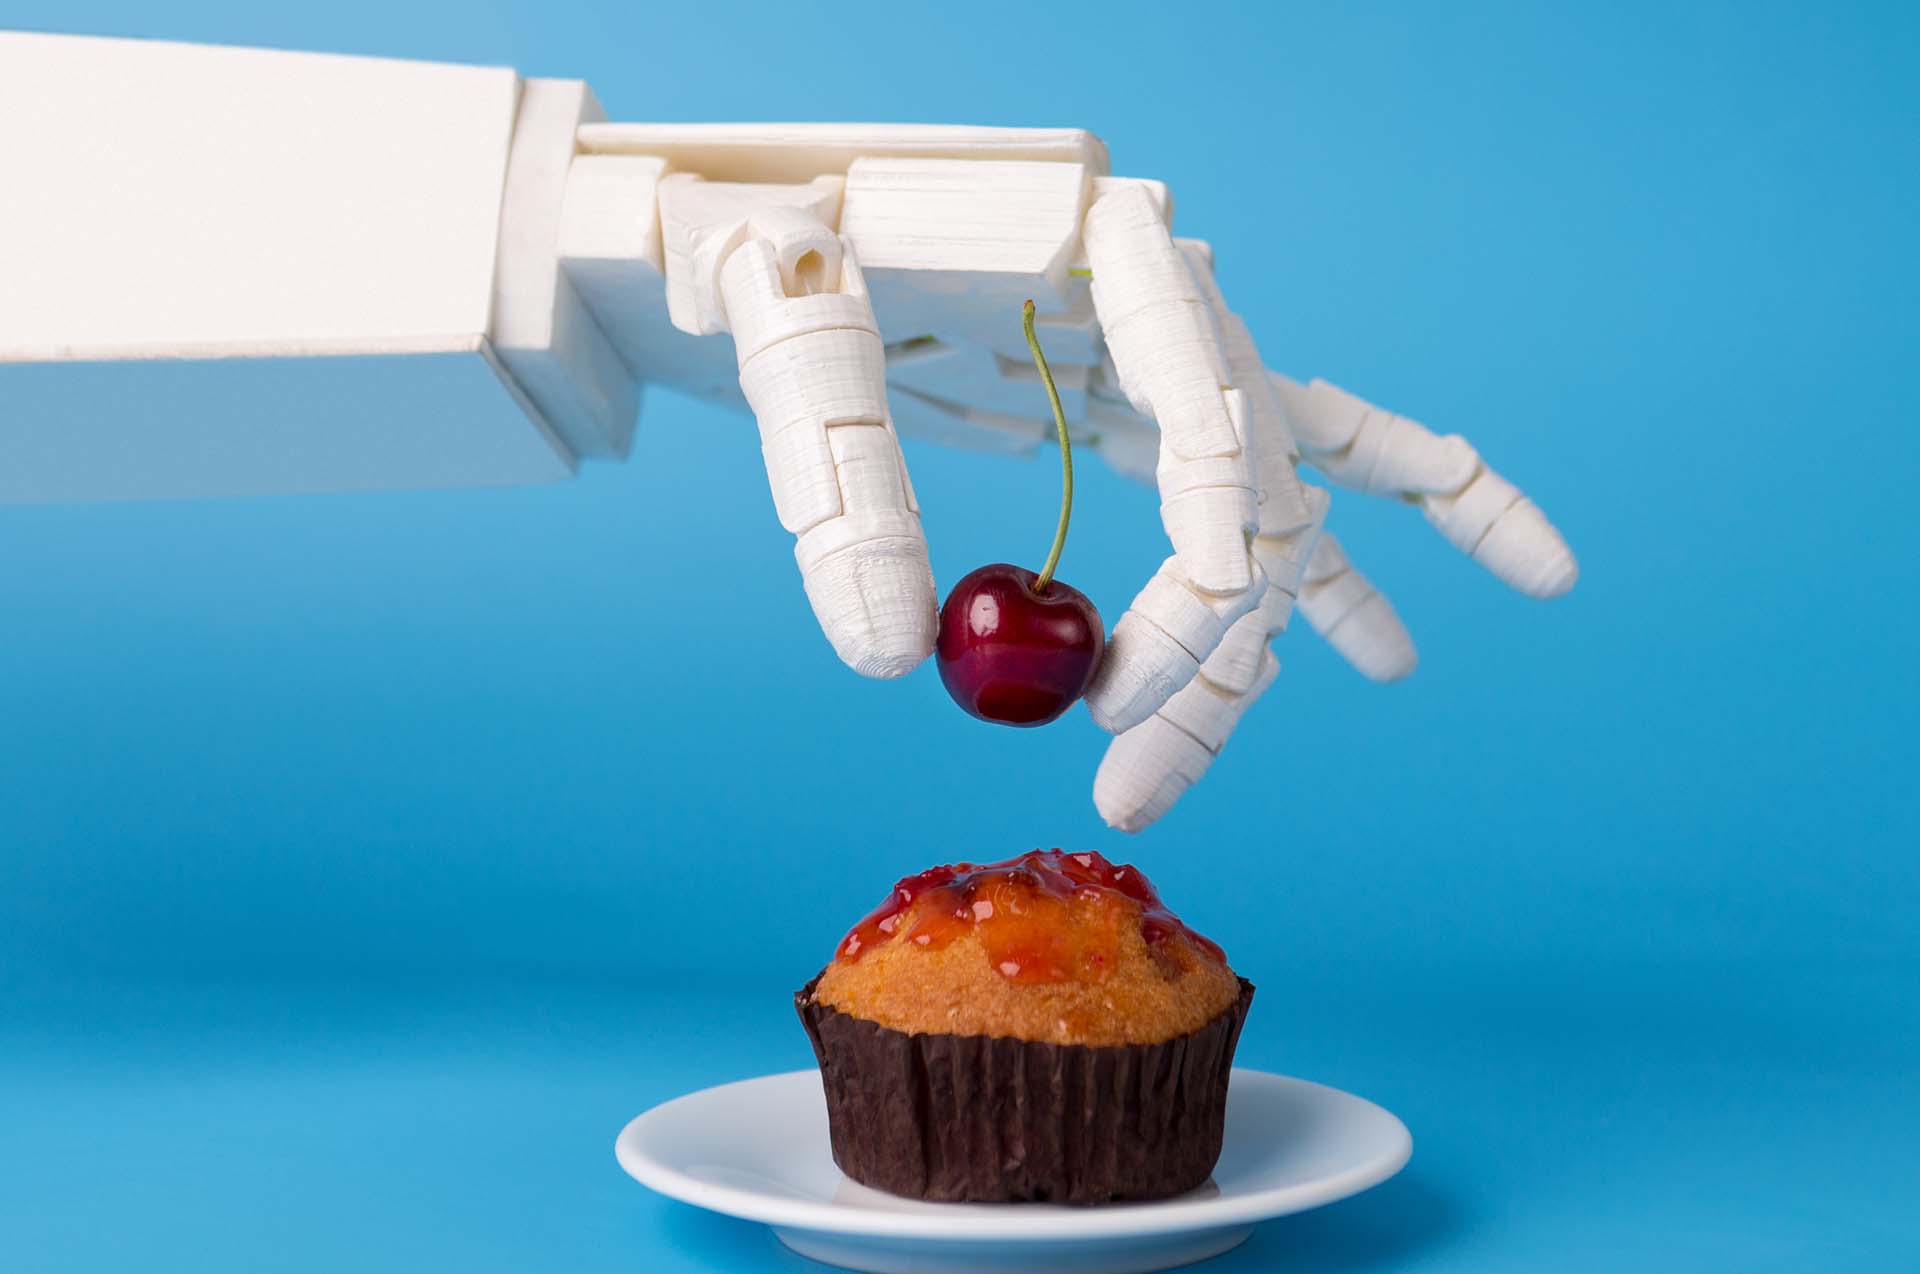 What Is The Impact Of Robots And Automation On The Dining Industry